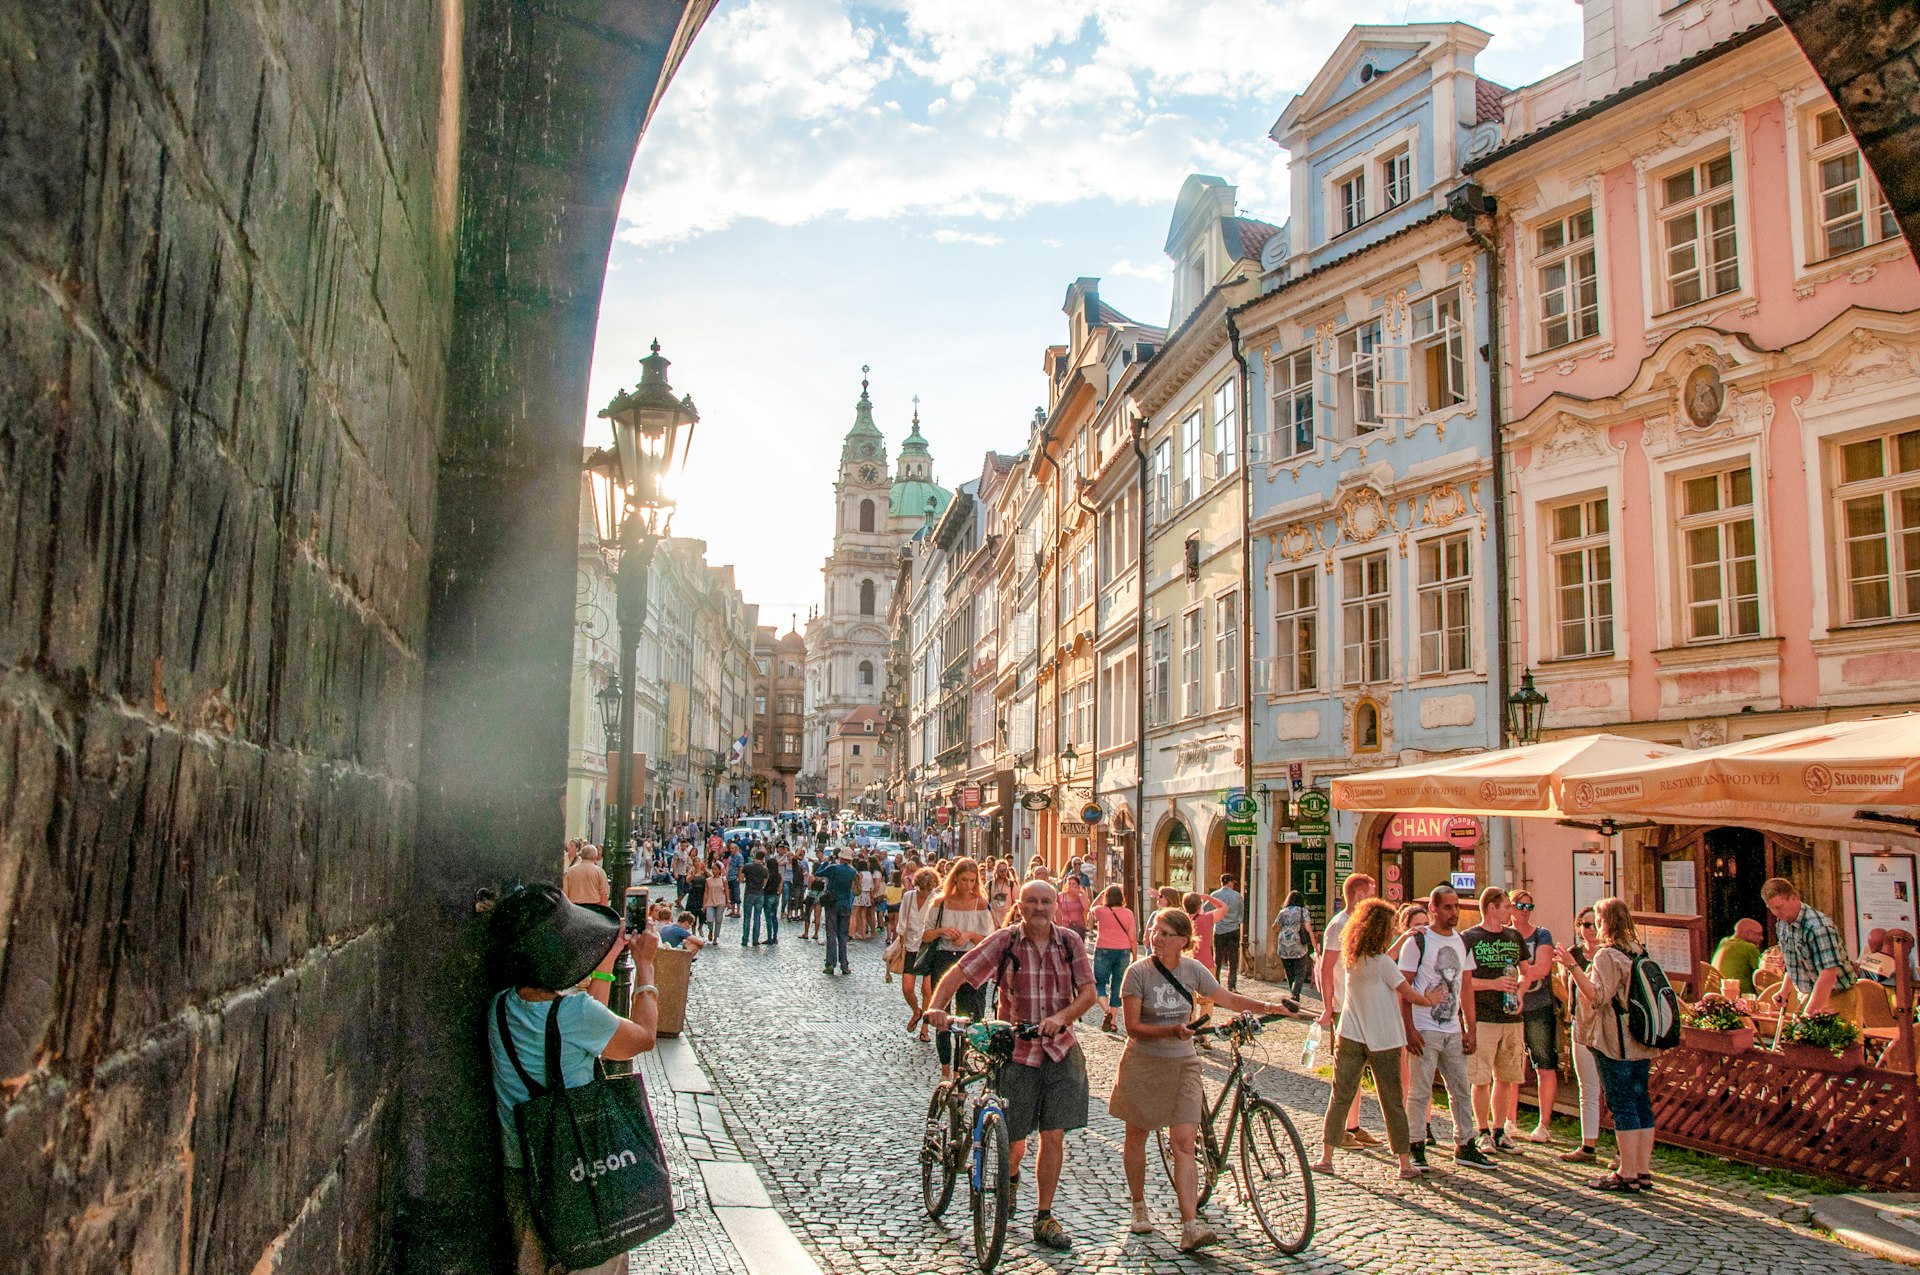 Many people are walking and pushing bicycles along a crowded cobblestone street in Prague at sunset in the summertime